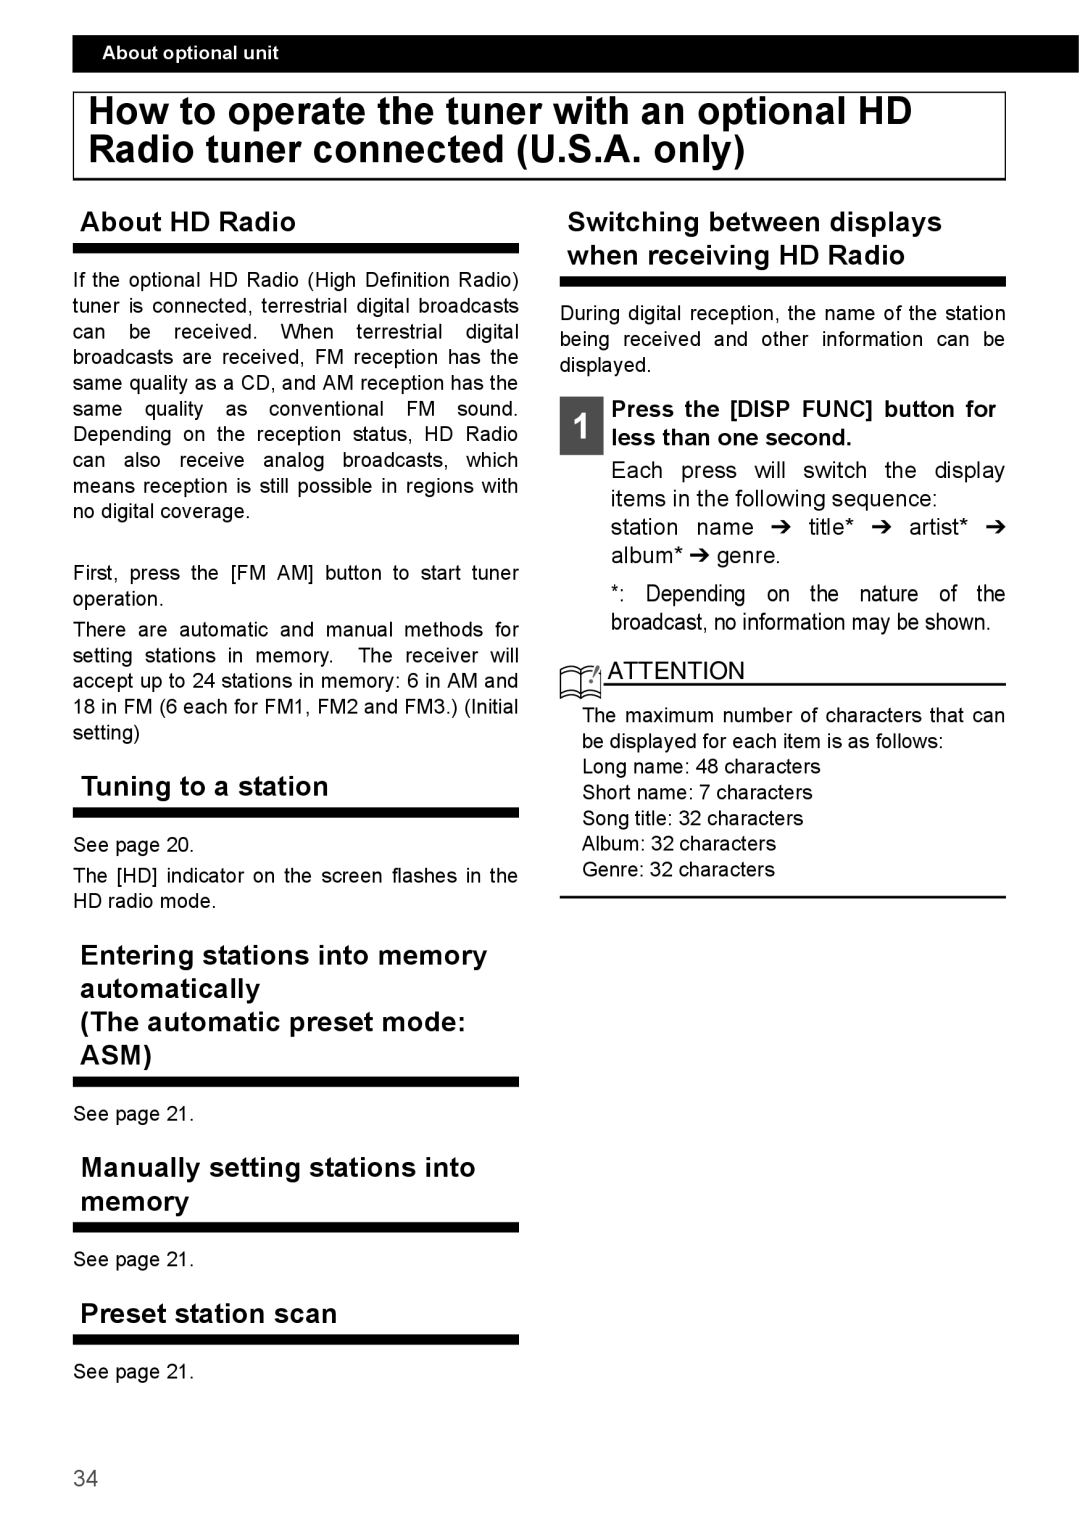 Eclipse - Fujitsu Ten CD2000 manual About HD Radio, Tuning to a station, Switching between displays when receiving HD Radio 